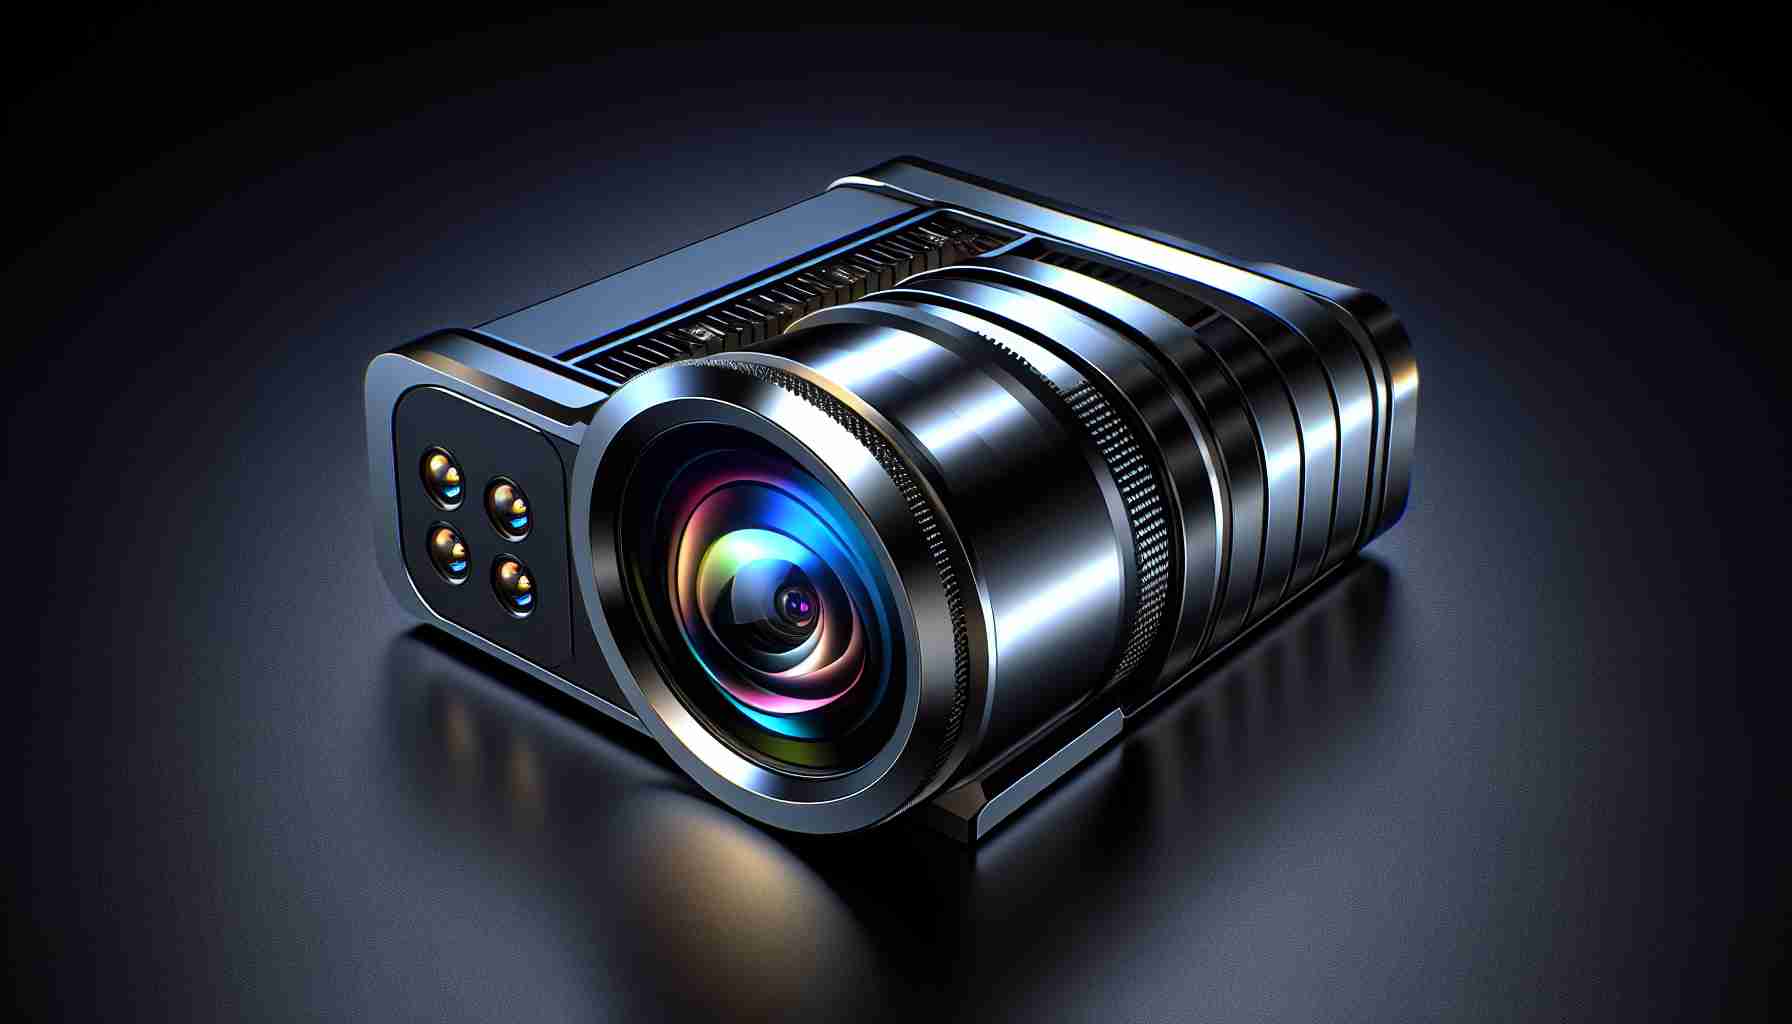 High-definition, realistic image of a ground-breaking camera technology introduced in a future model of a popular smartphone brand. The camera boasts impressive features, including sophisticated optics and advanced computational abilities. It showcases a sleek and modern design, a perfect combination of luxury, technology, and future innovation.